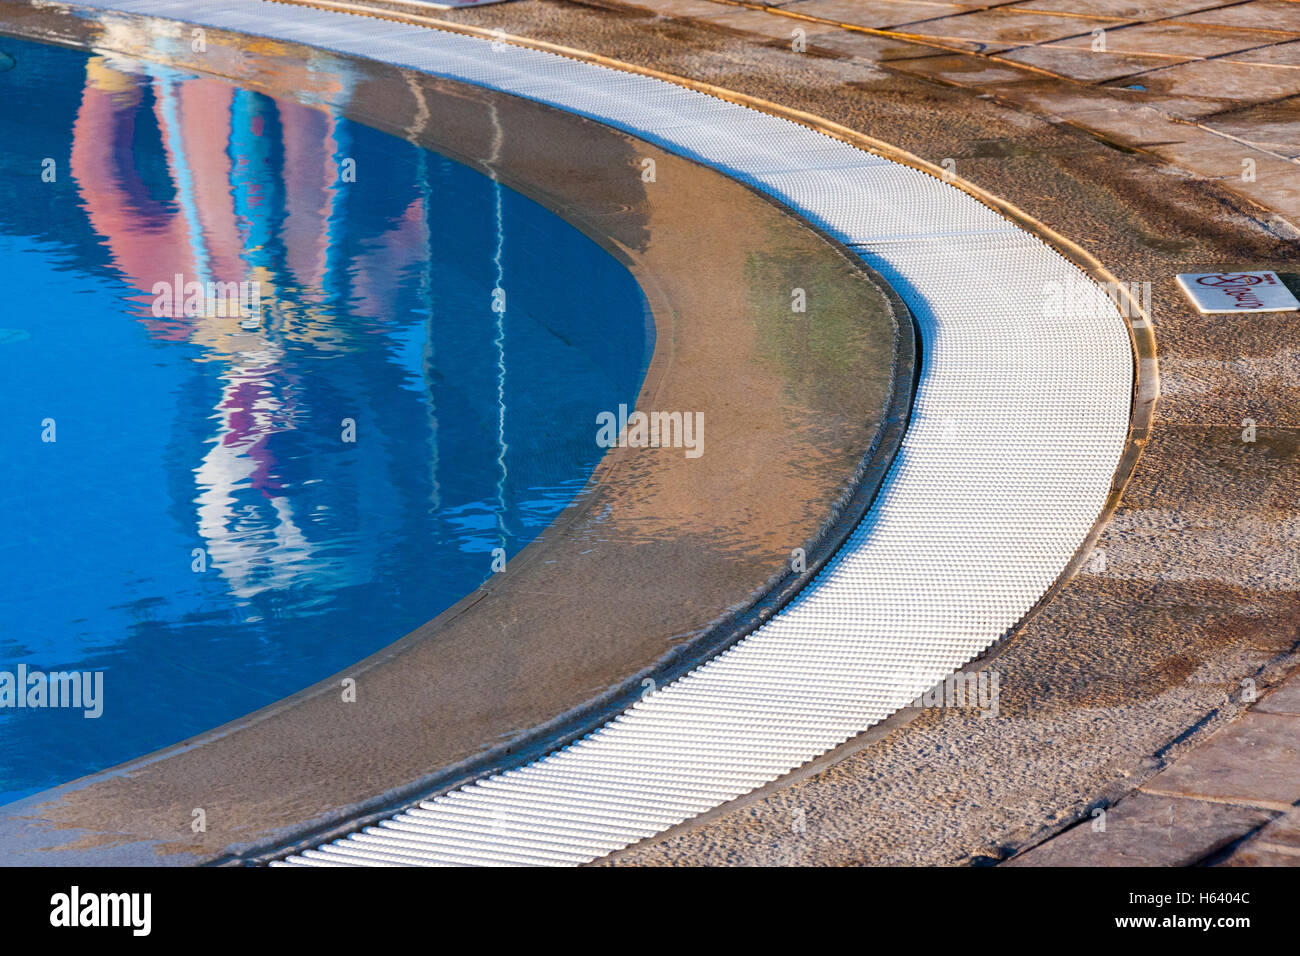 clown statue reflection in swimming pool Stock Photo